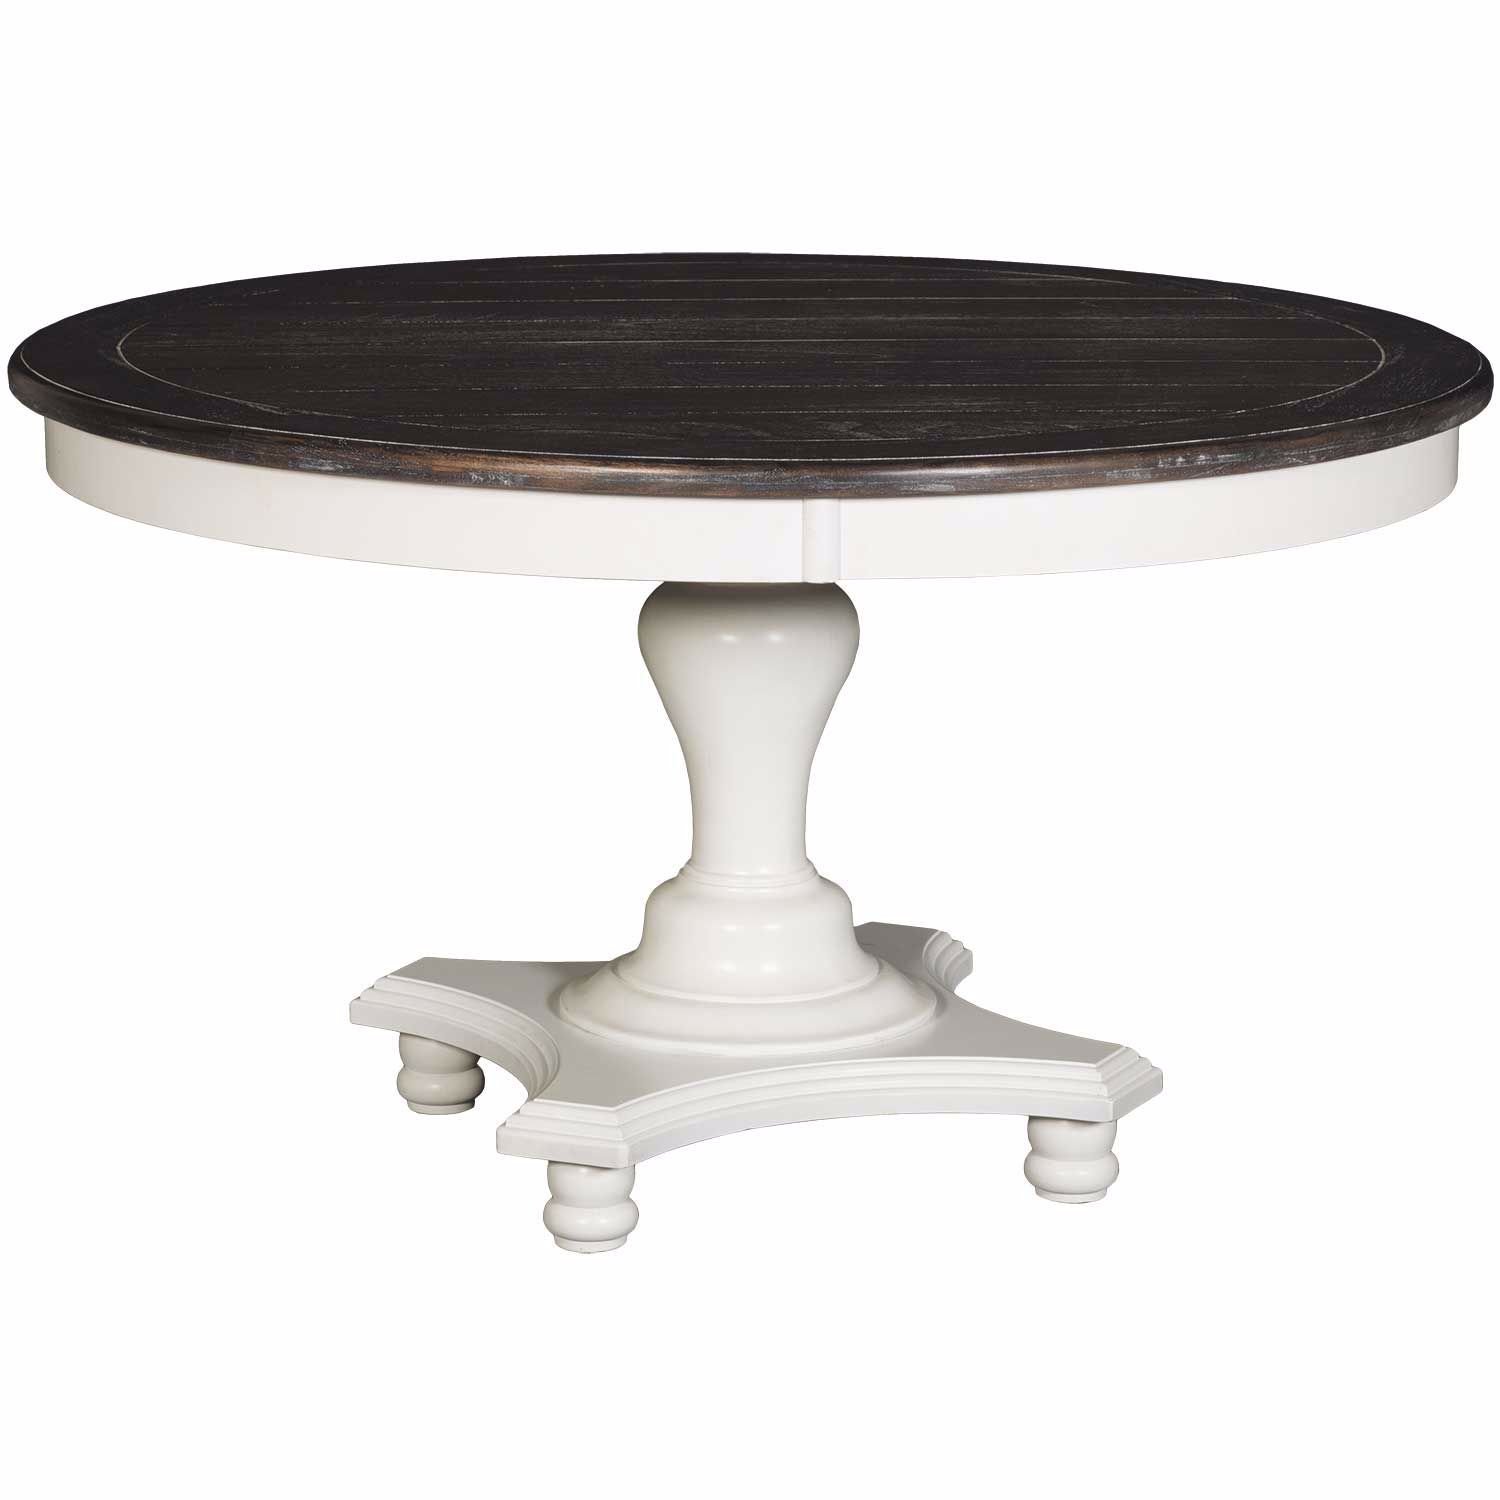 French Country Regular Height Dining Table | T-1014EC-B T-1014EC-T ...